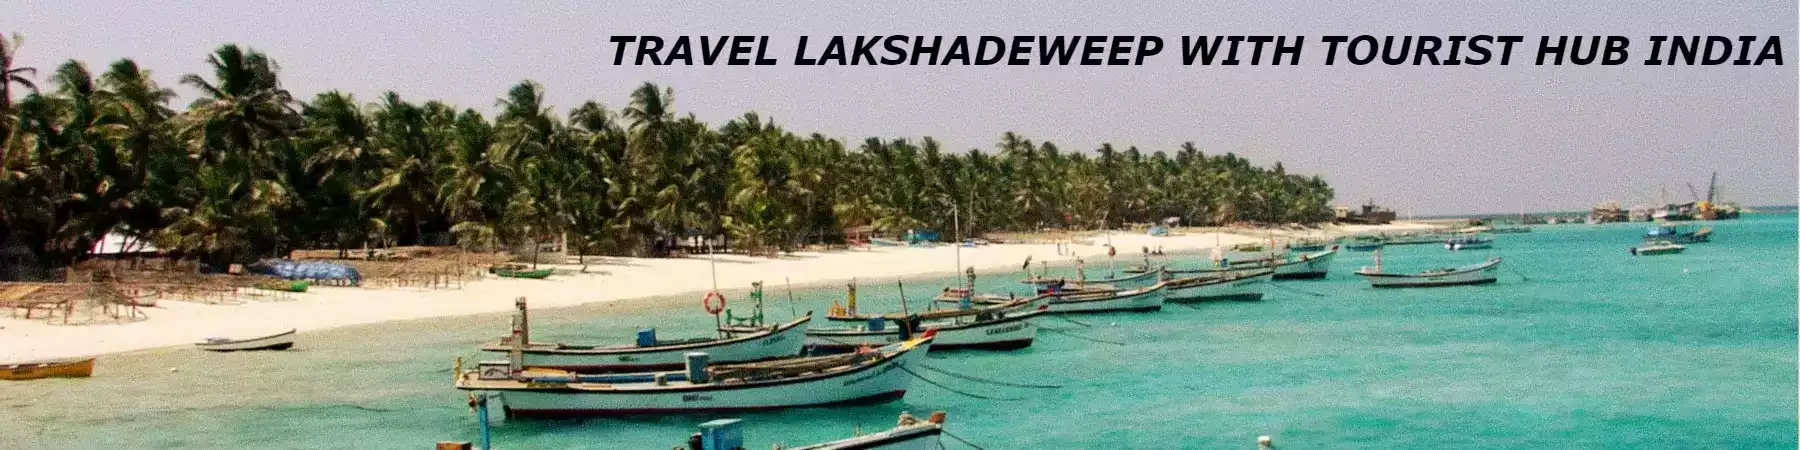 Lakshadweep holiday packages from India with Tourist Hub India - The Best Lakshadweep Travel Agency